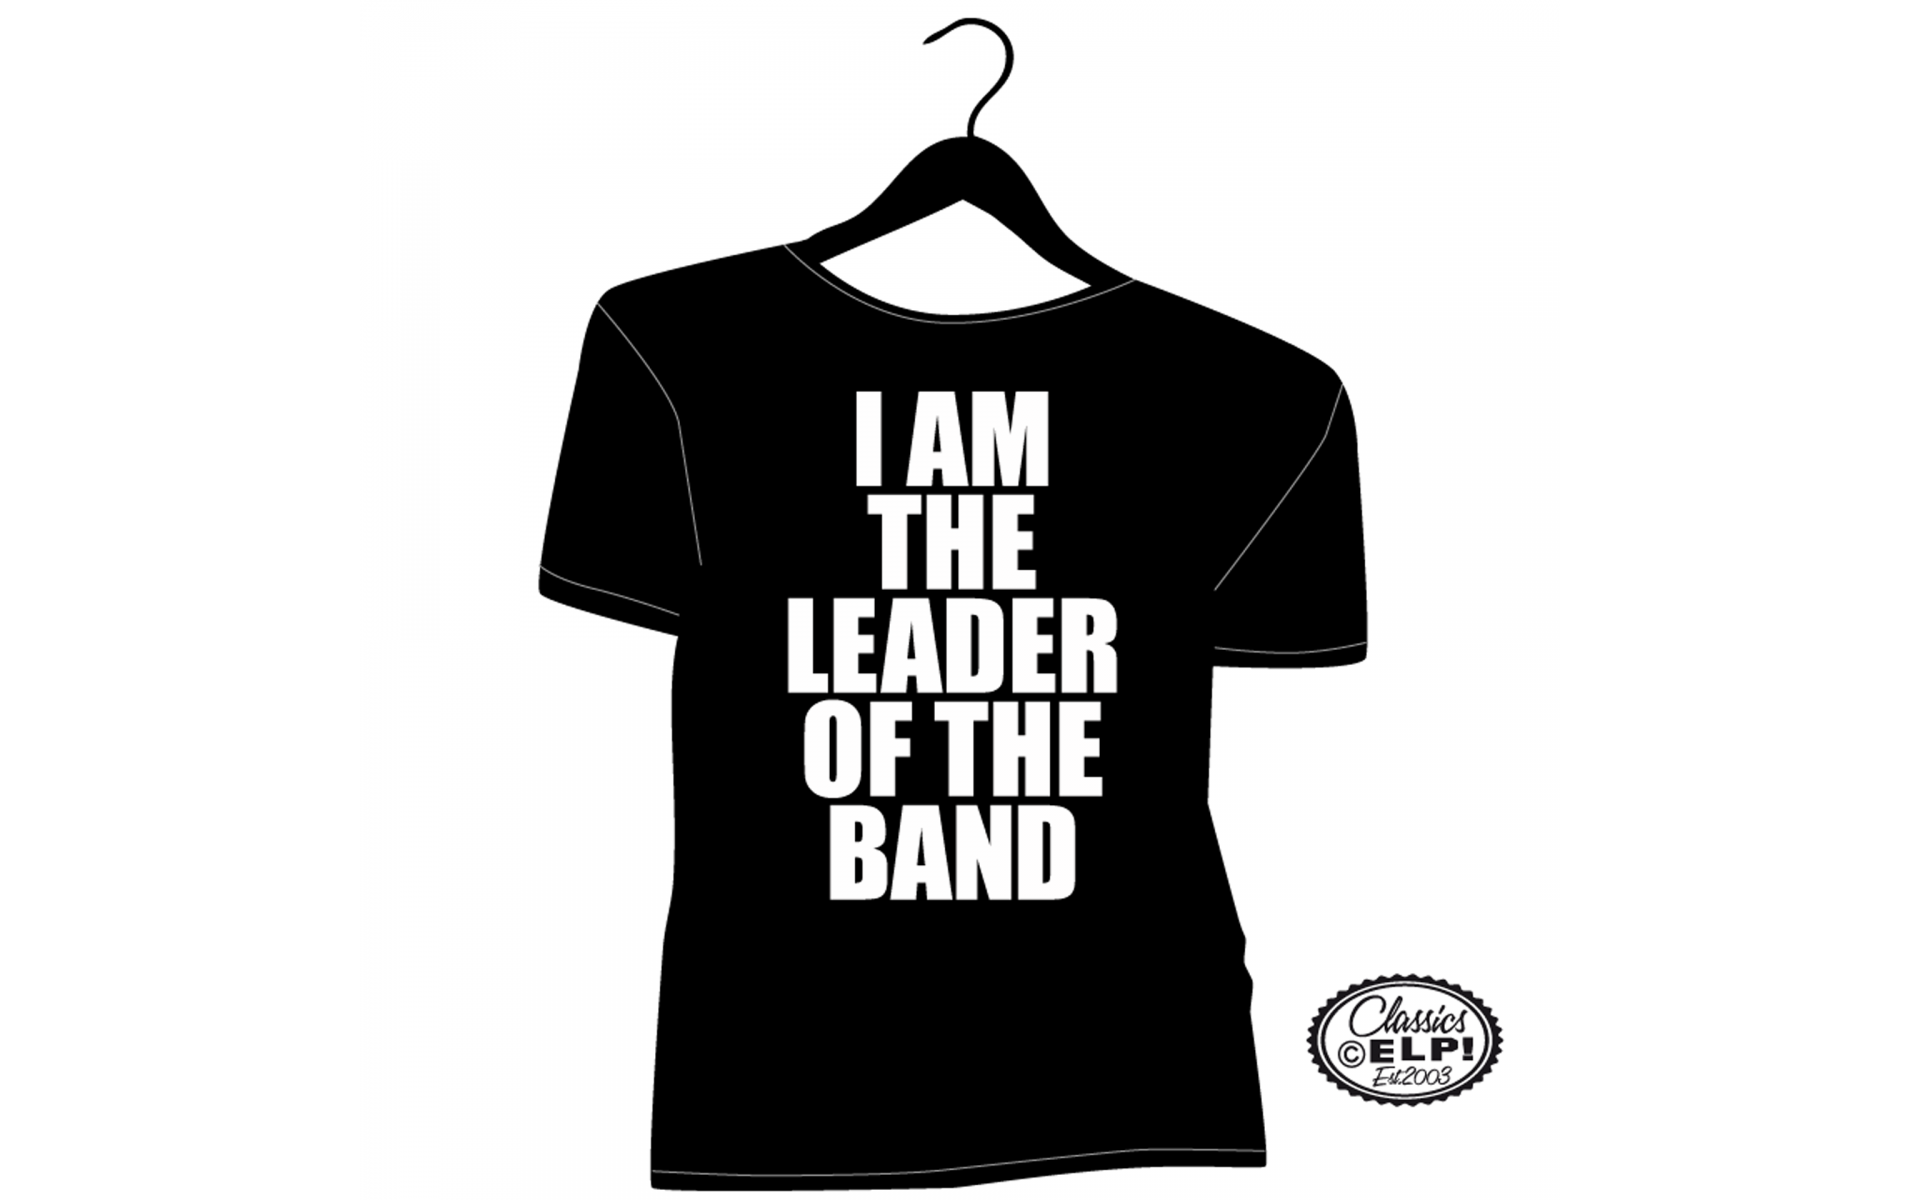 I am the leader of the band